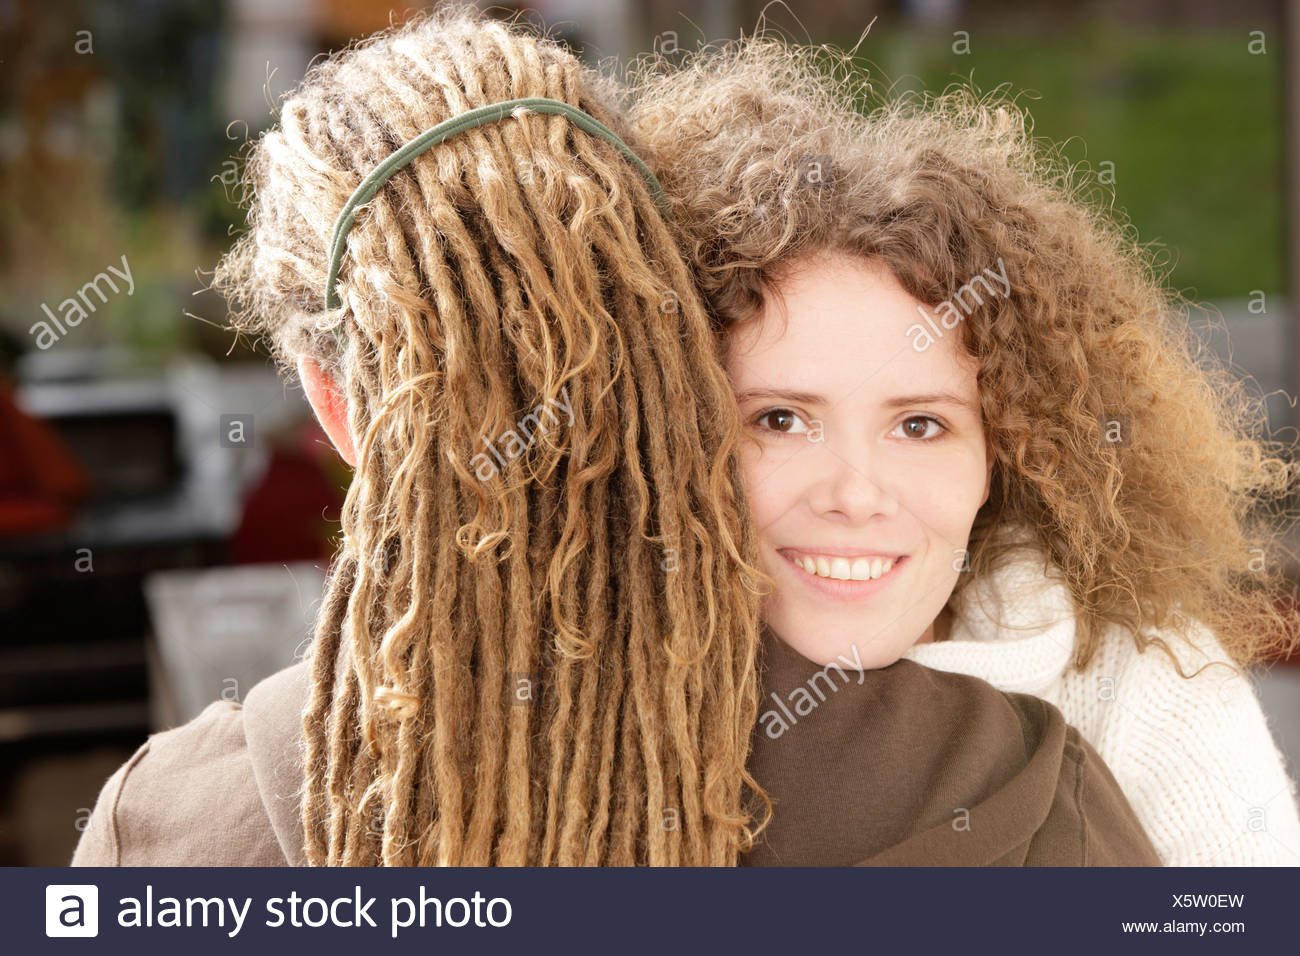 Woman With Curly Hair Smiling And A Man With Dreadlocks